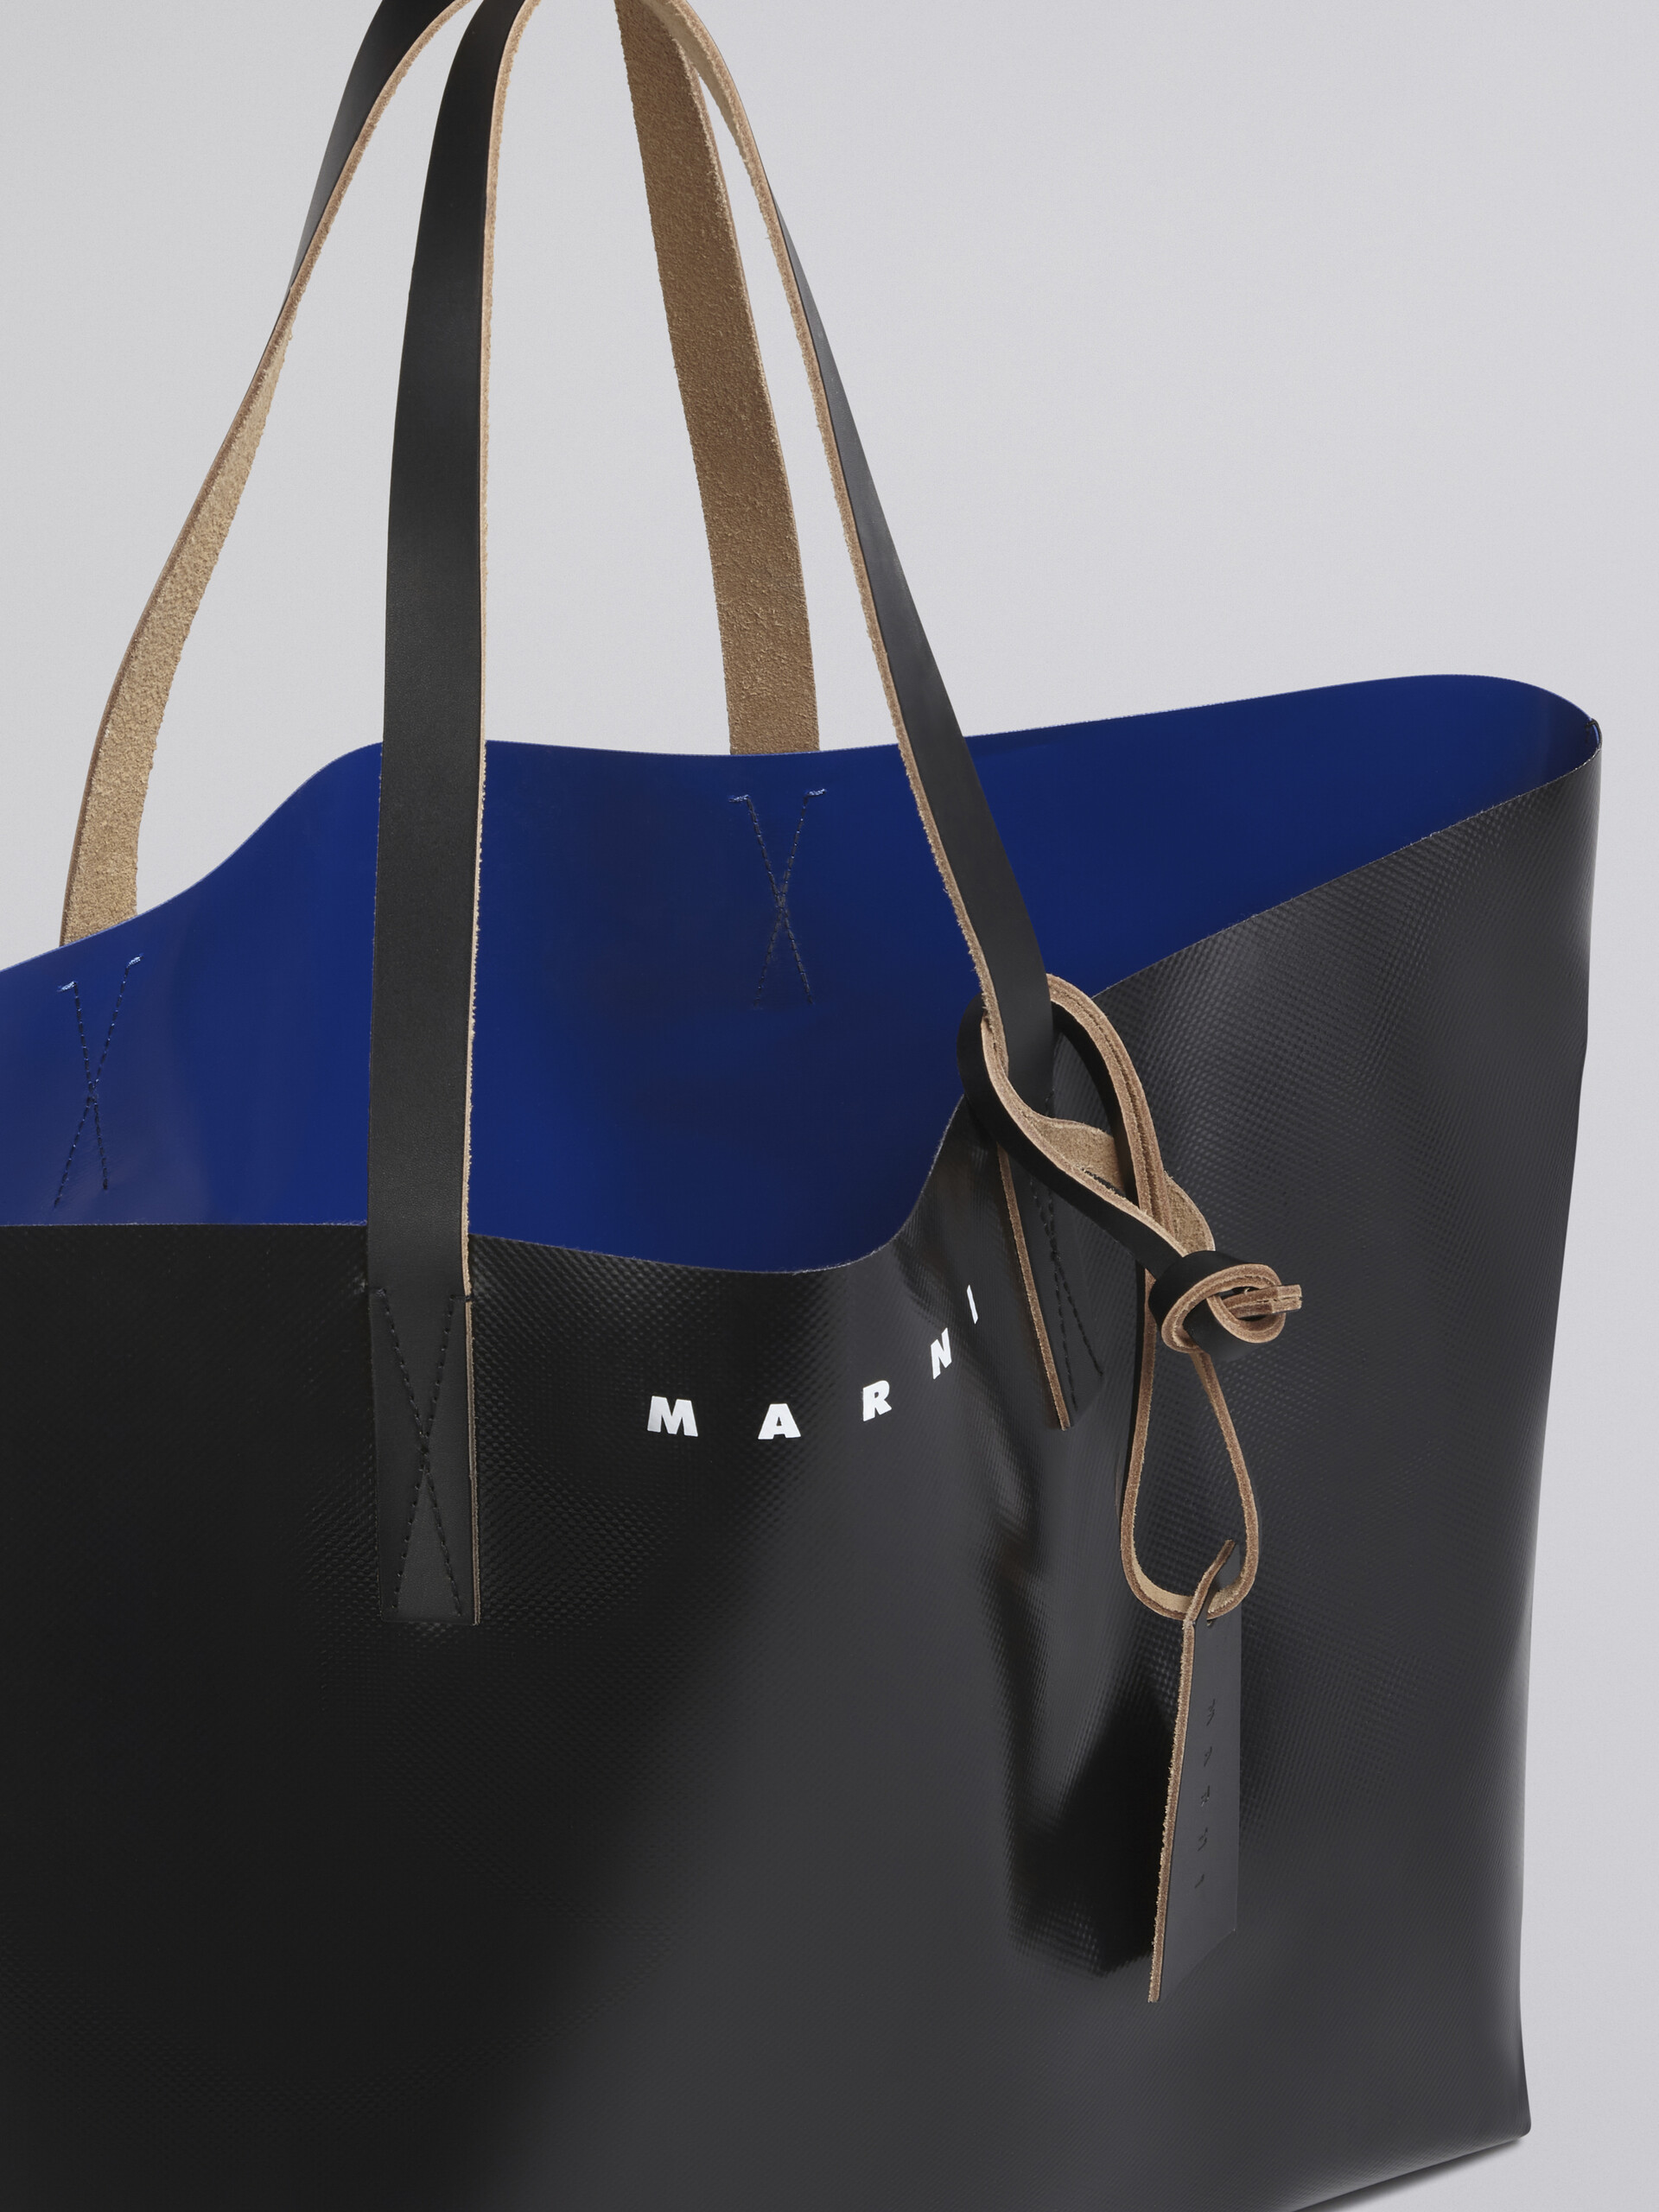 Black and blue TRIBECA shopping bag - Shopping Bags - Image 4